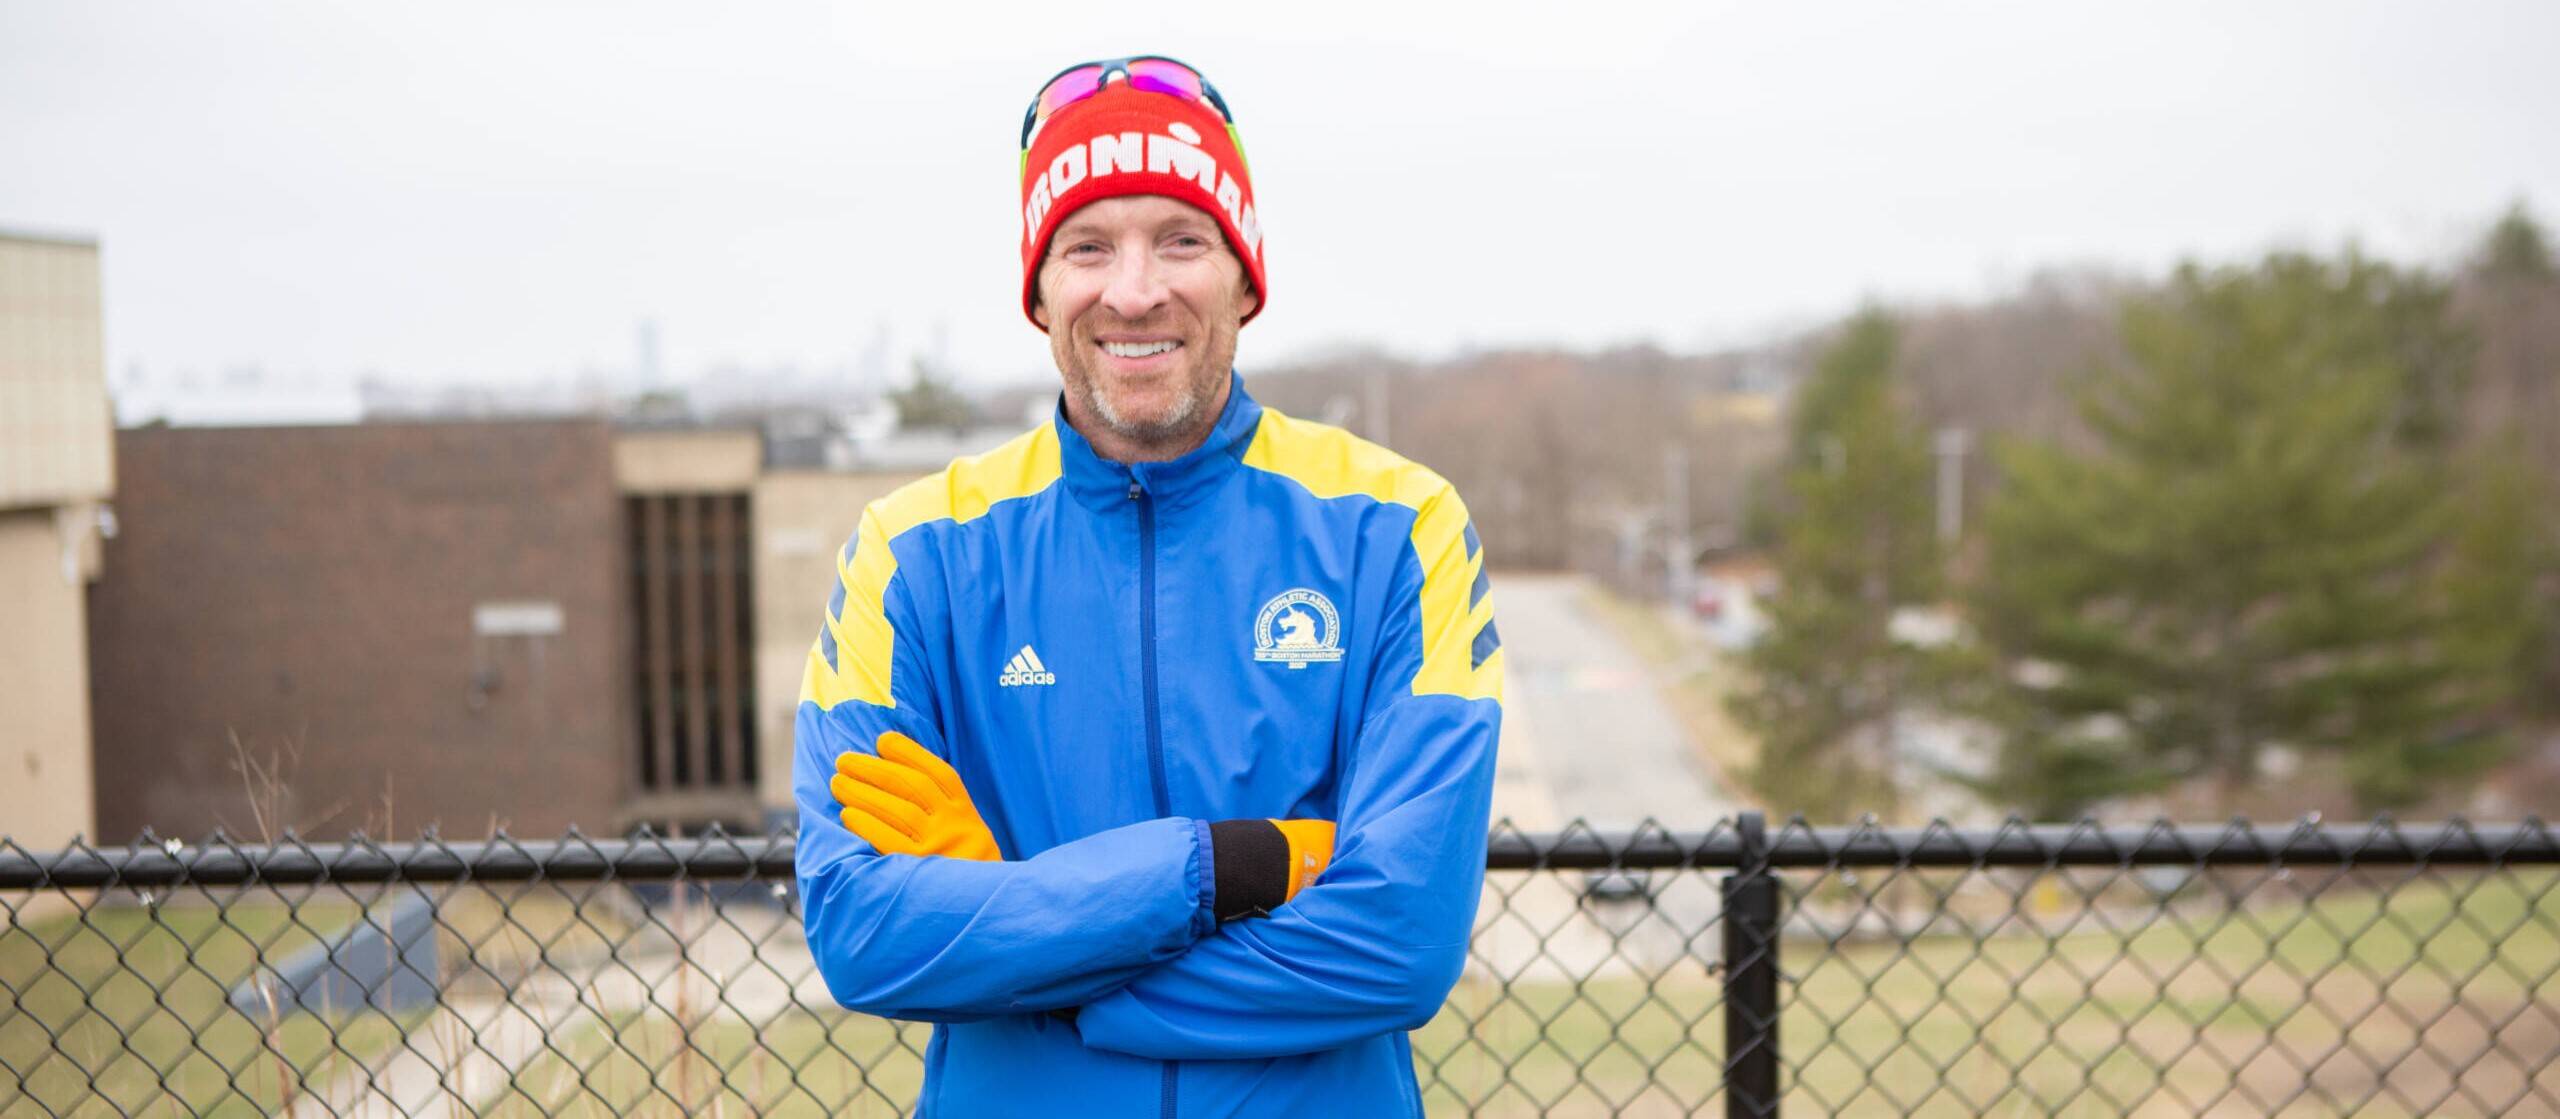 Dr. David King will be running the Boston Marathon for the 14th time. In 2013, he ran the race and then went to work at MGH, performing surgeries on people injured by the bombs at the finish line. (Jacob Garcia/WBUR)